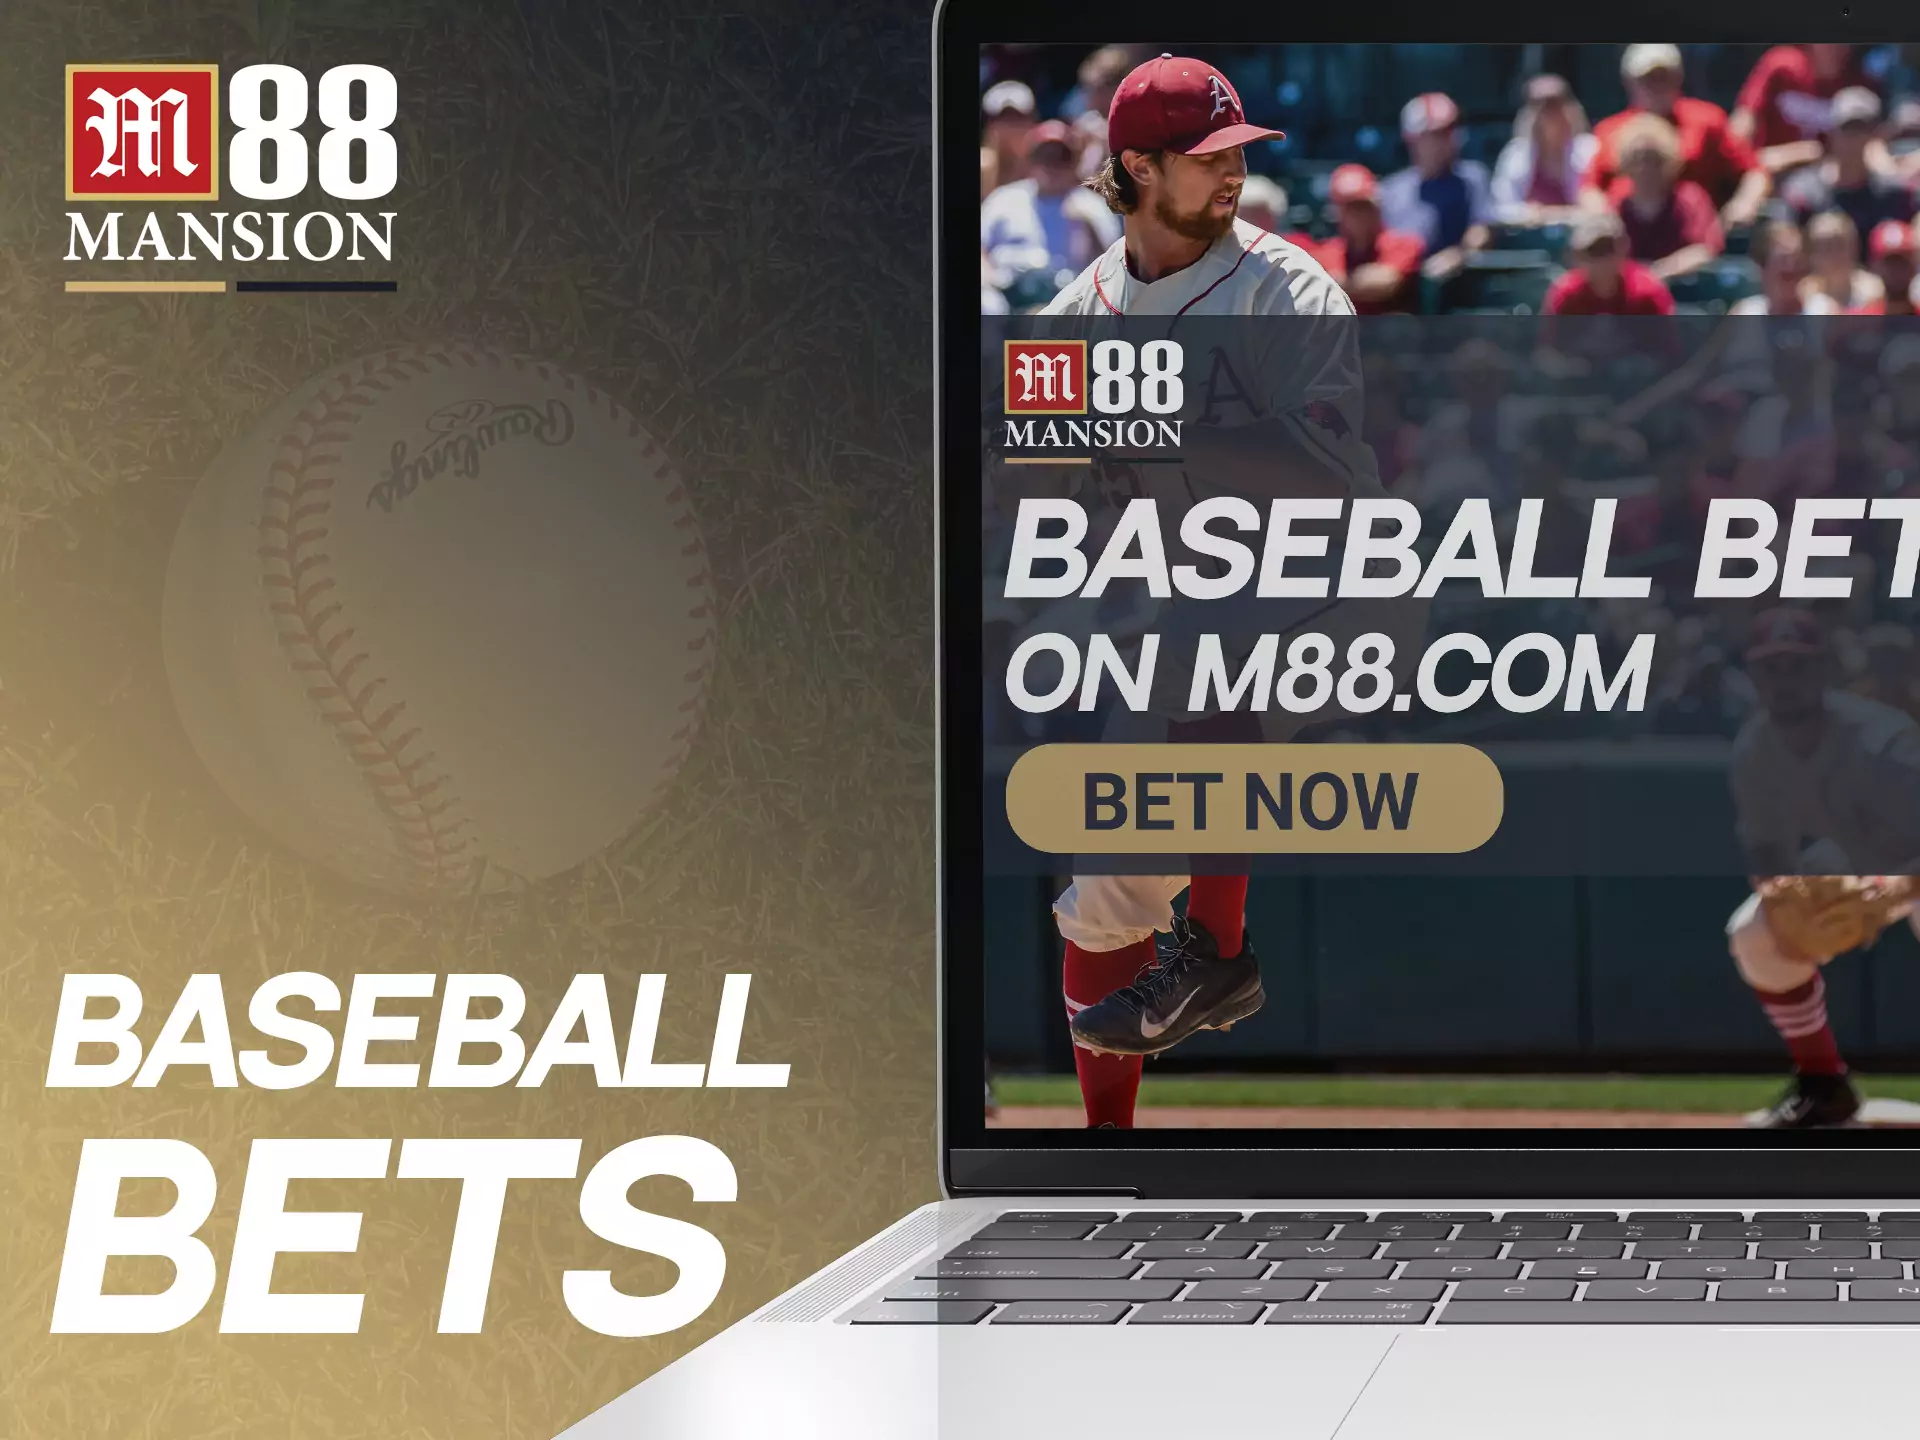 At M88, you can place bets on baseball.